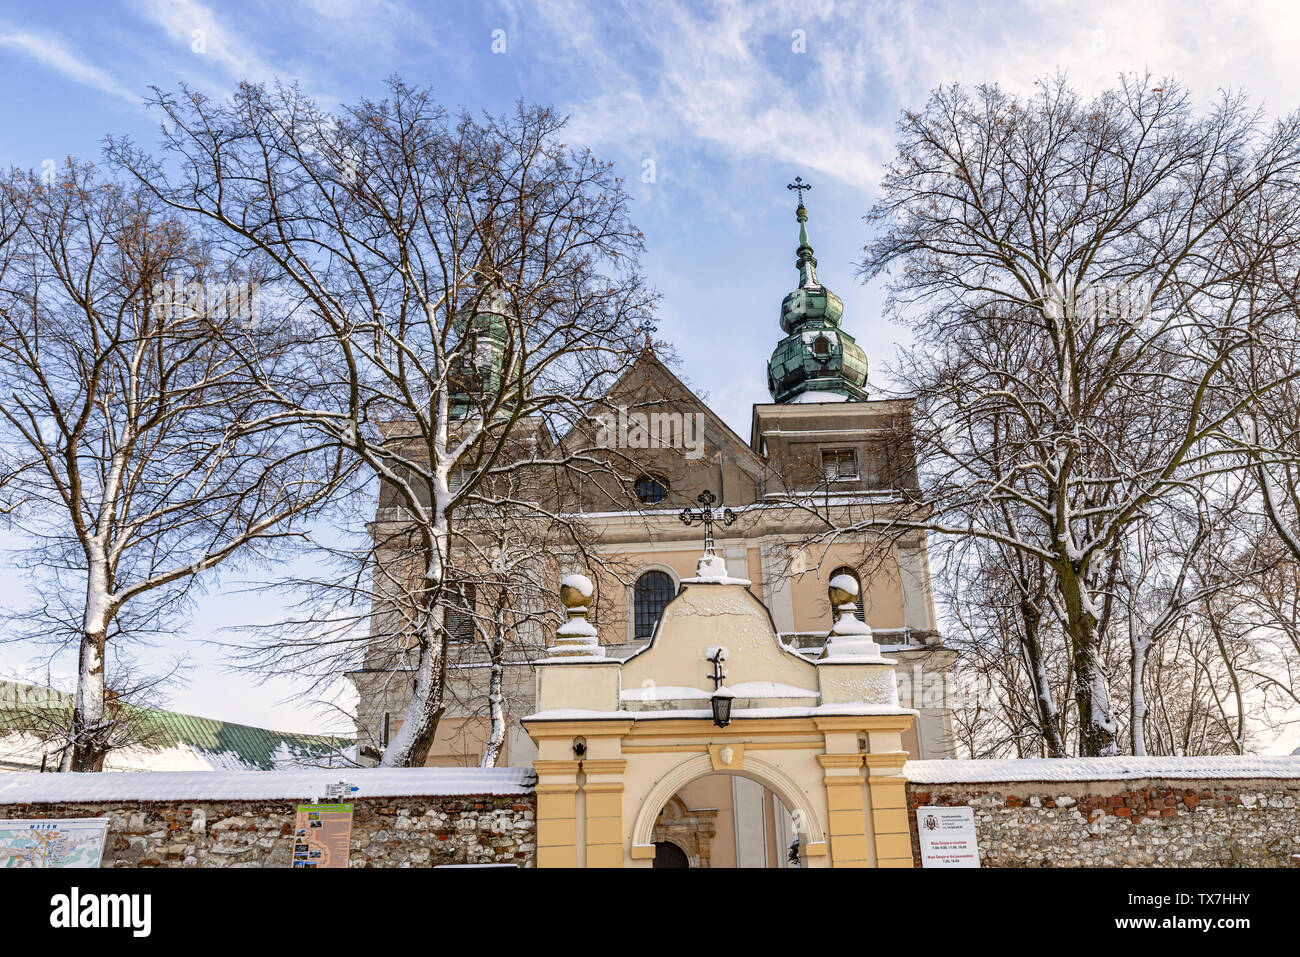 View at the facade of Parish church and monastery in Mstow, Poland Stock Photo